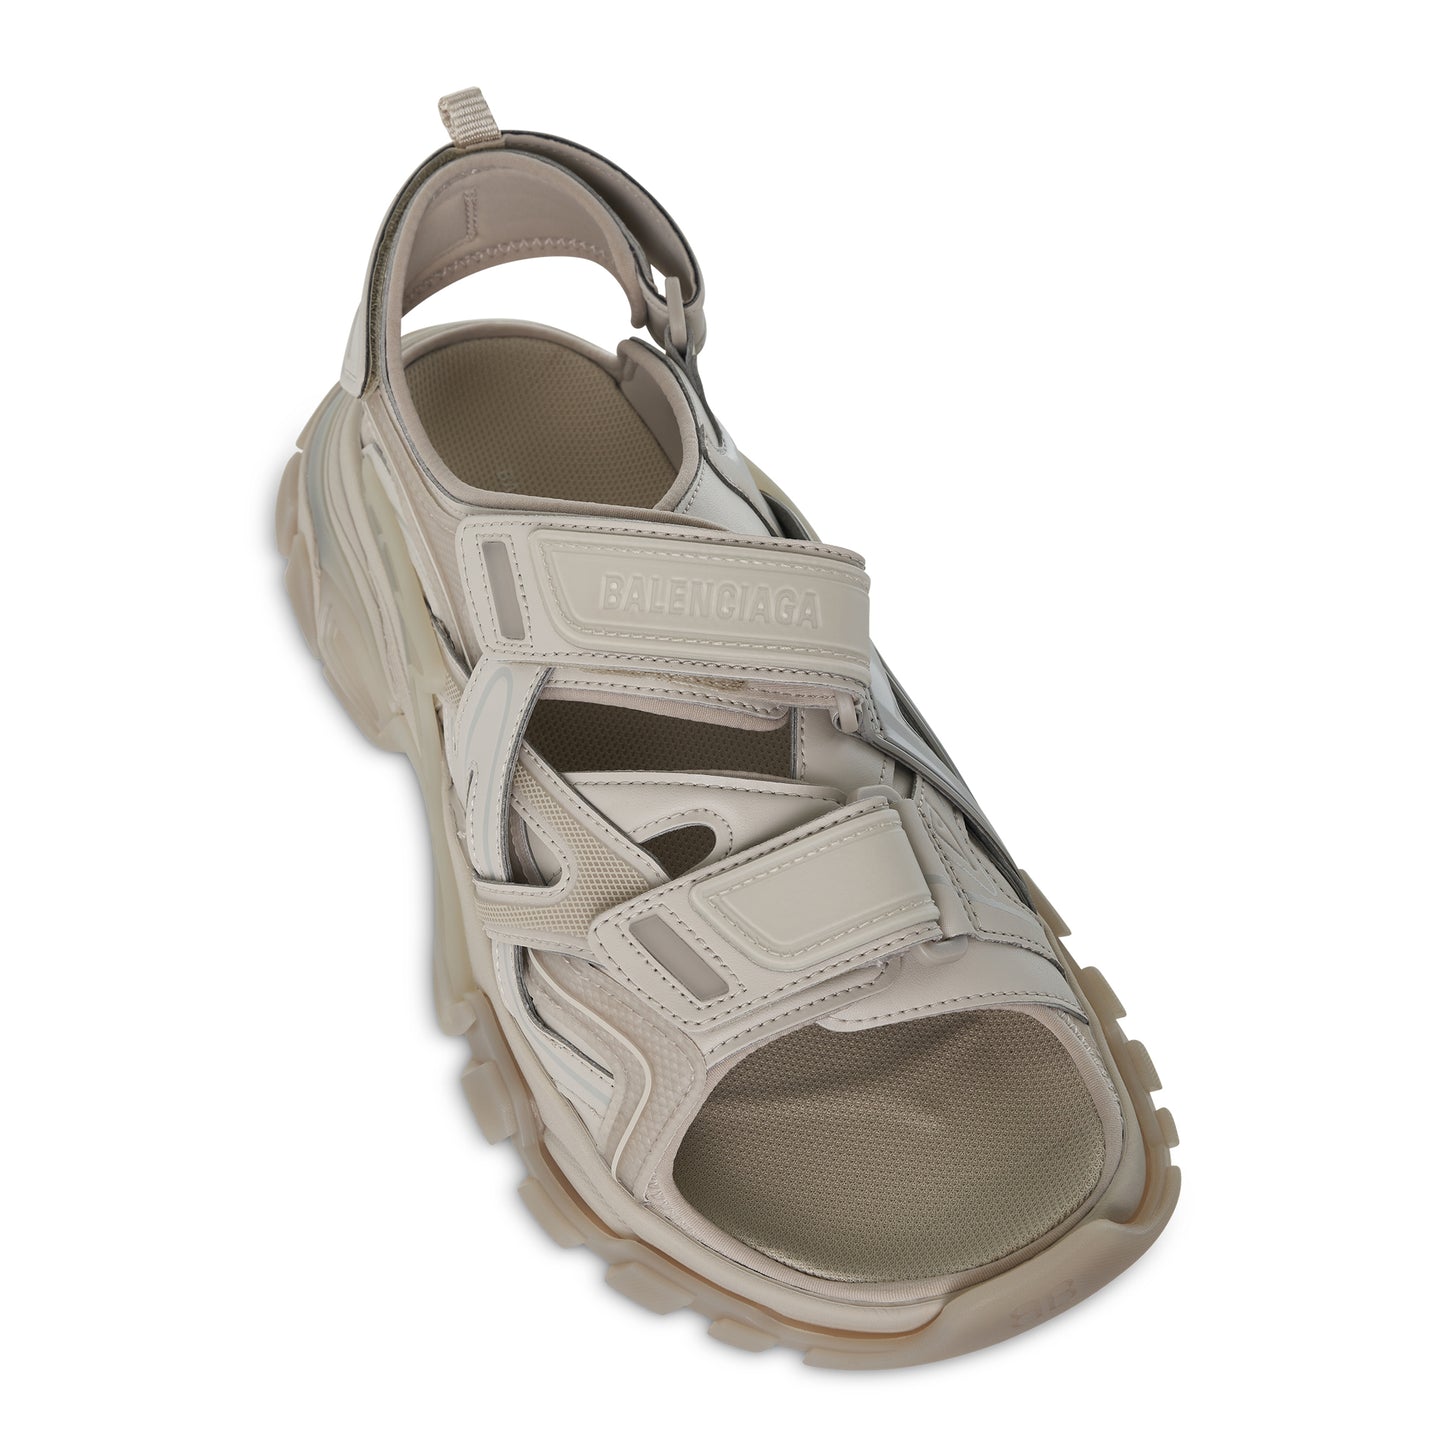 Track Strap Clears Sandal in Beige